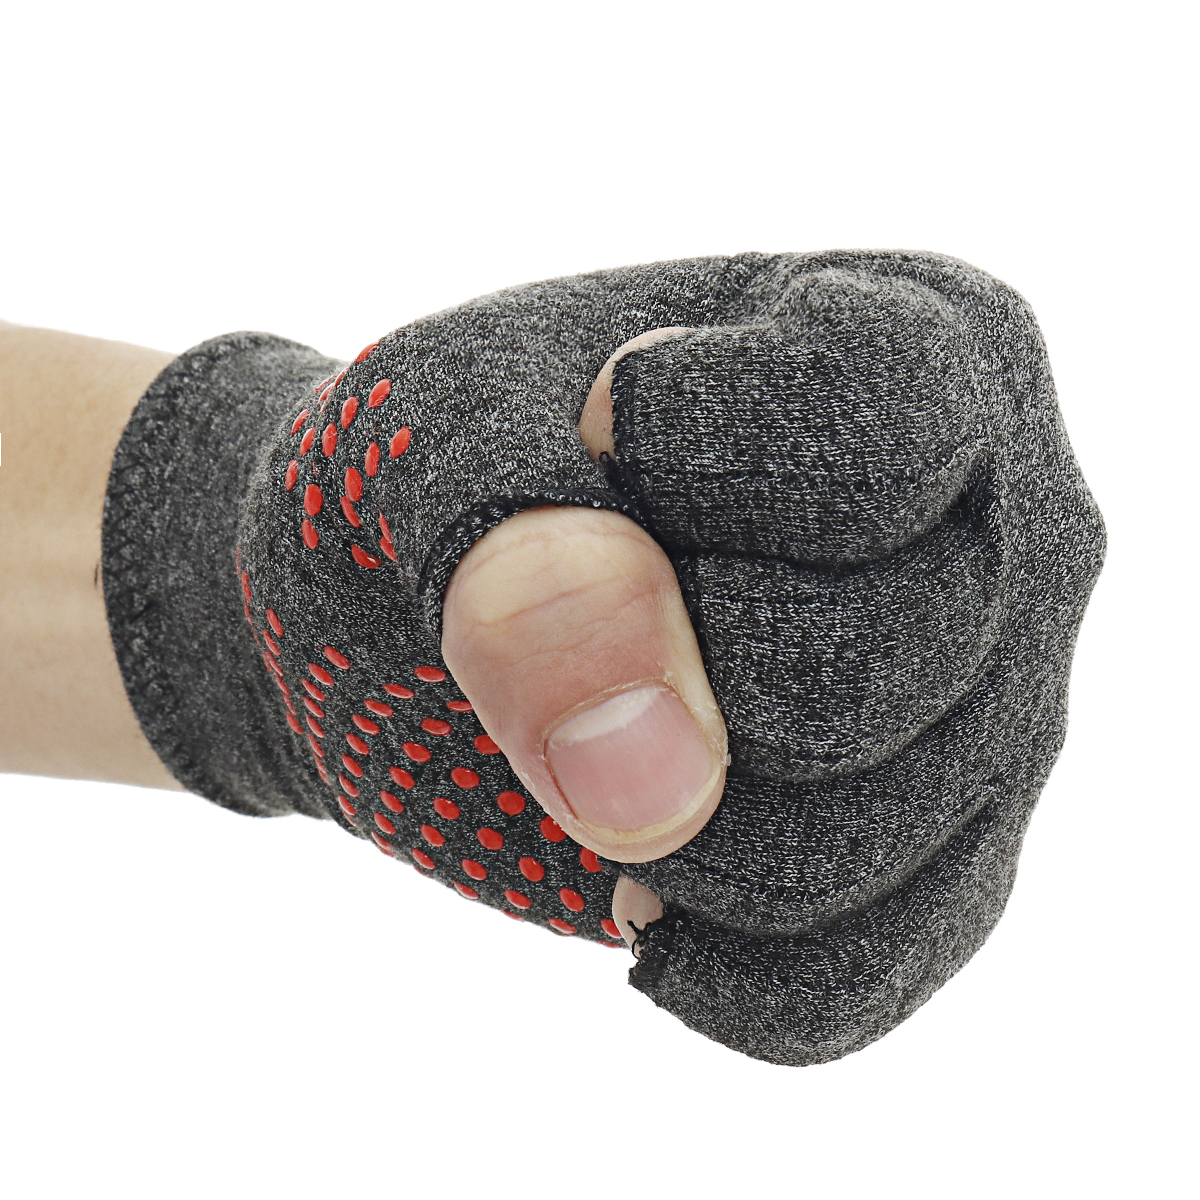 1-Pair-Compression-Arthritis-Gloves-Arthritic-Joint-Pain-Relief-Hand-Gloves-Therapy-Open-Fingers-Com-1777634-7